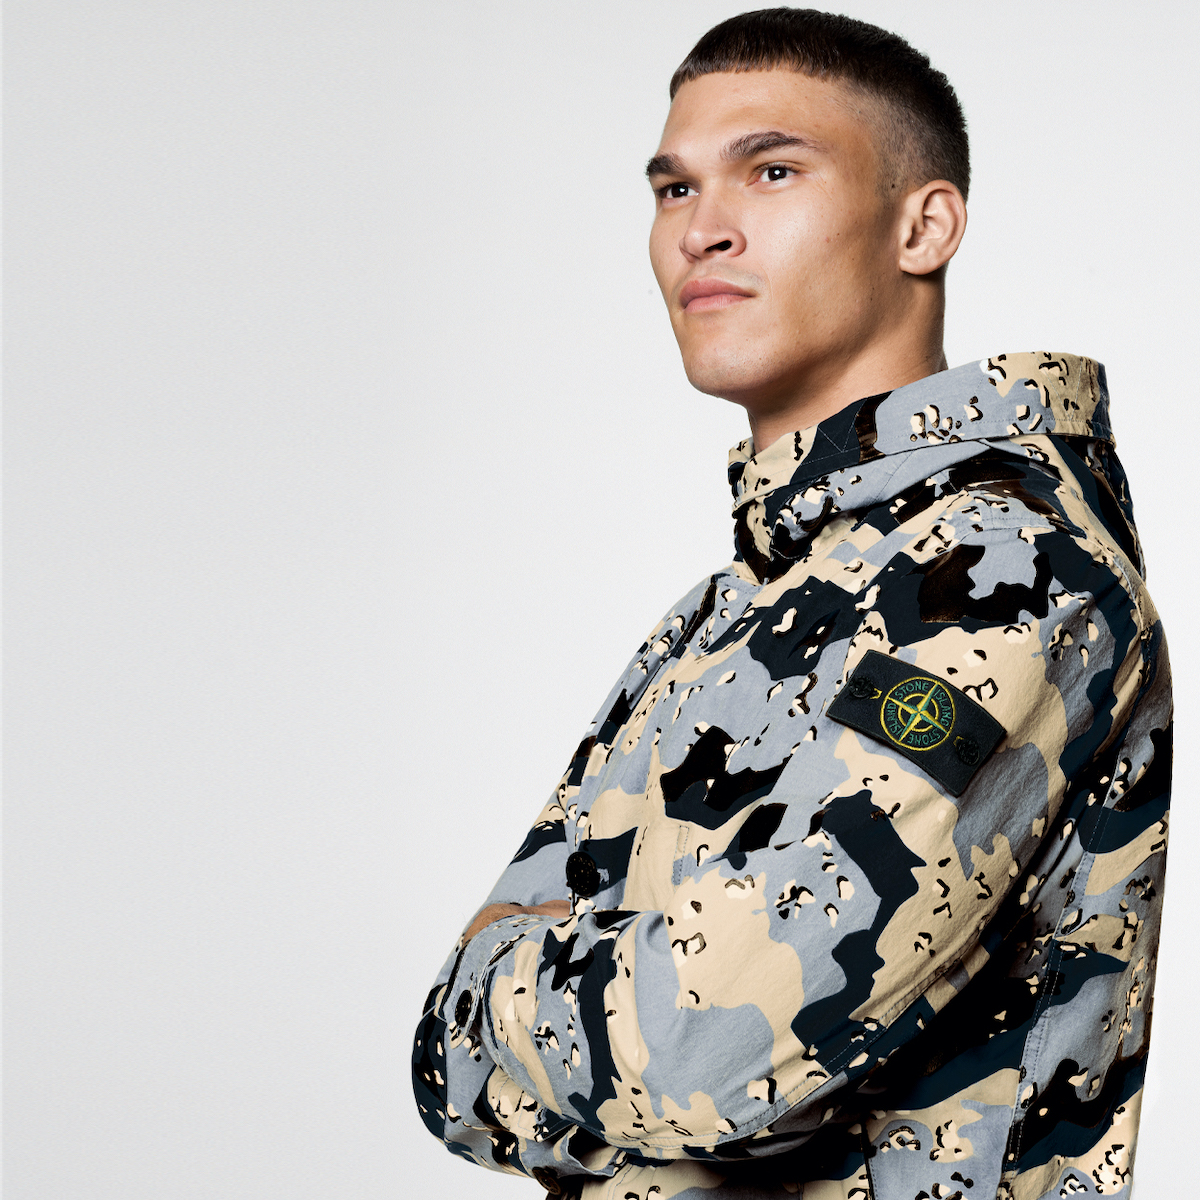 Stone Island drop Six-Piece Camo Collection exclusively at Browns